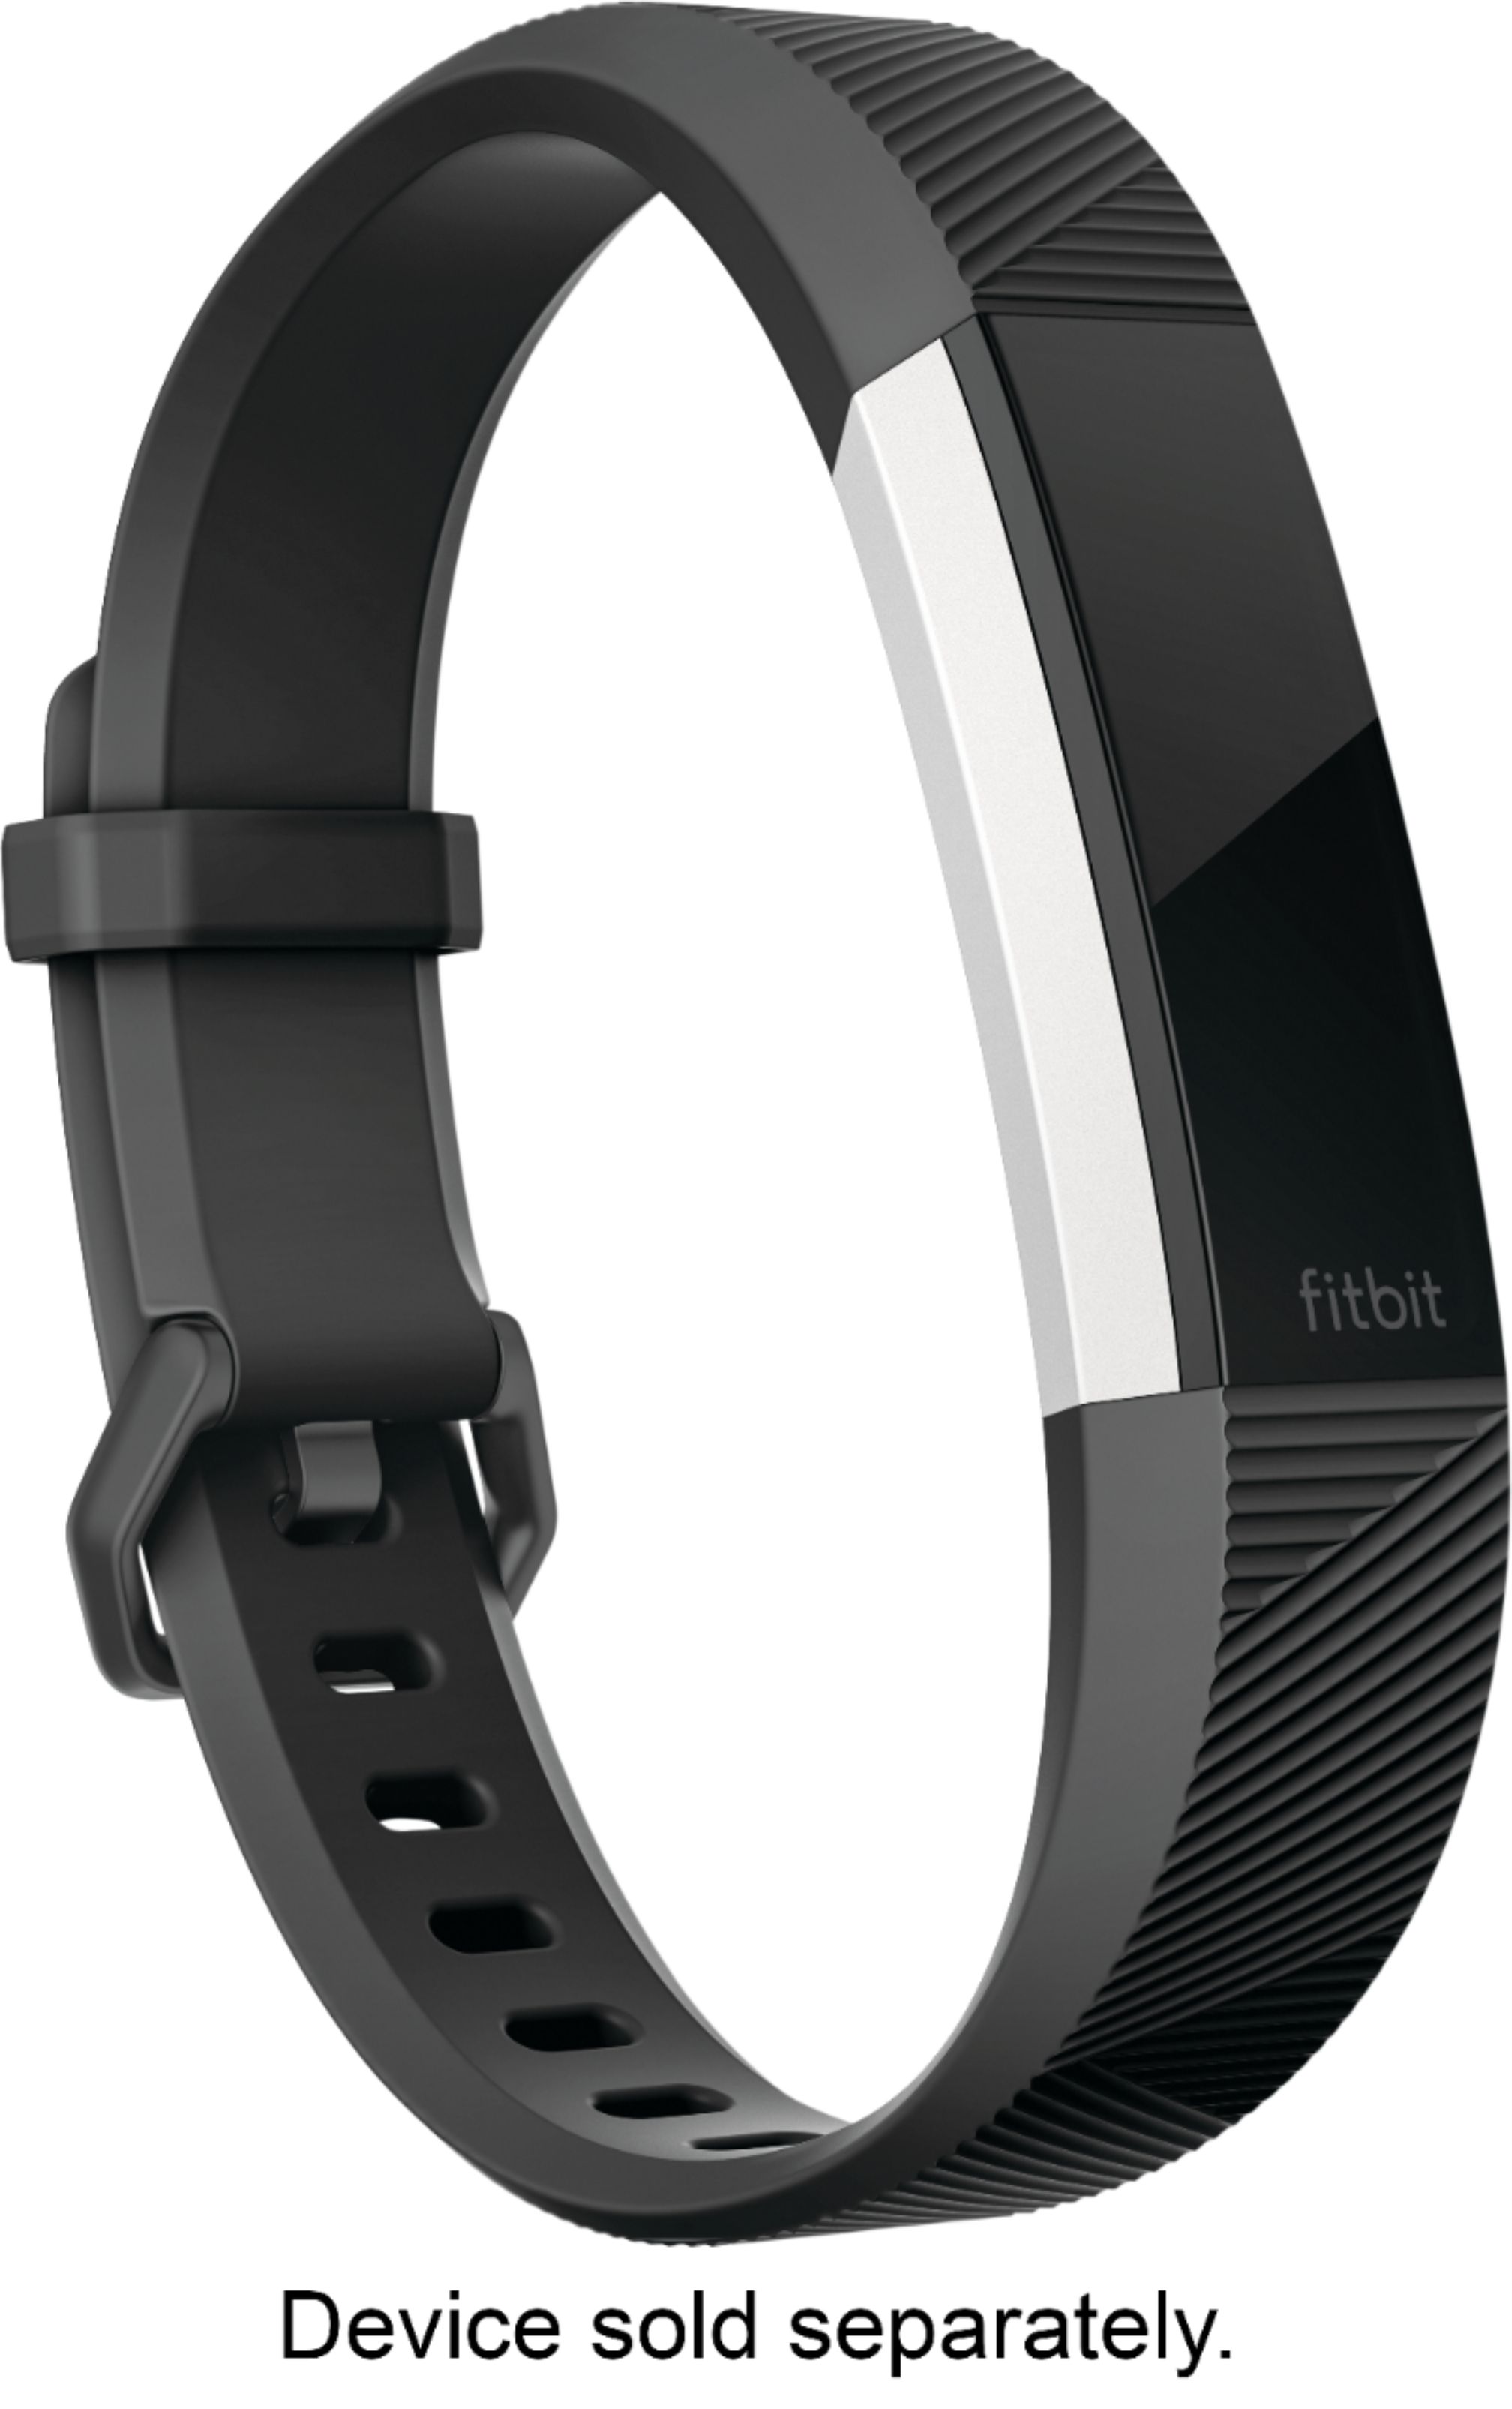  Classic Wristband for Fitbit Alta / Alta HR Activity Trackers - Large - Black